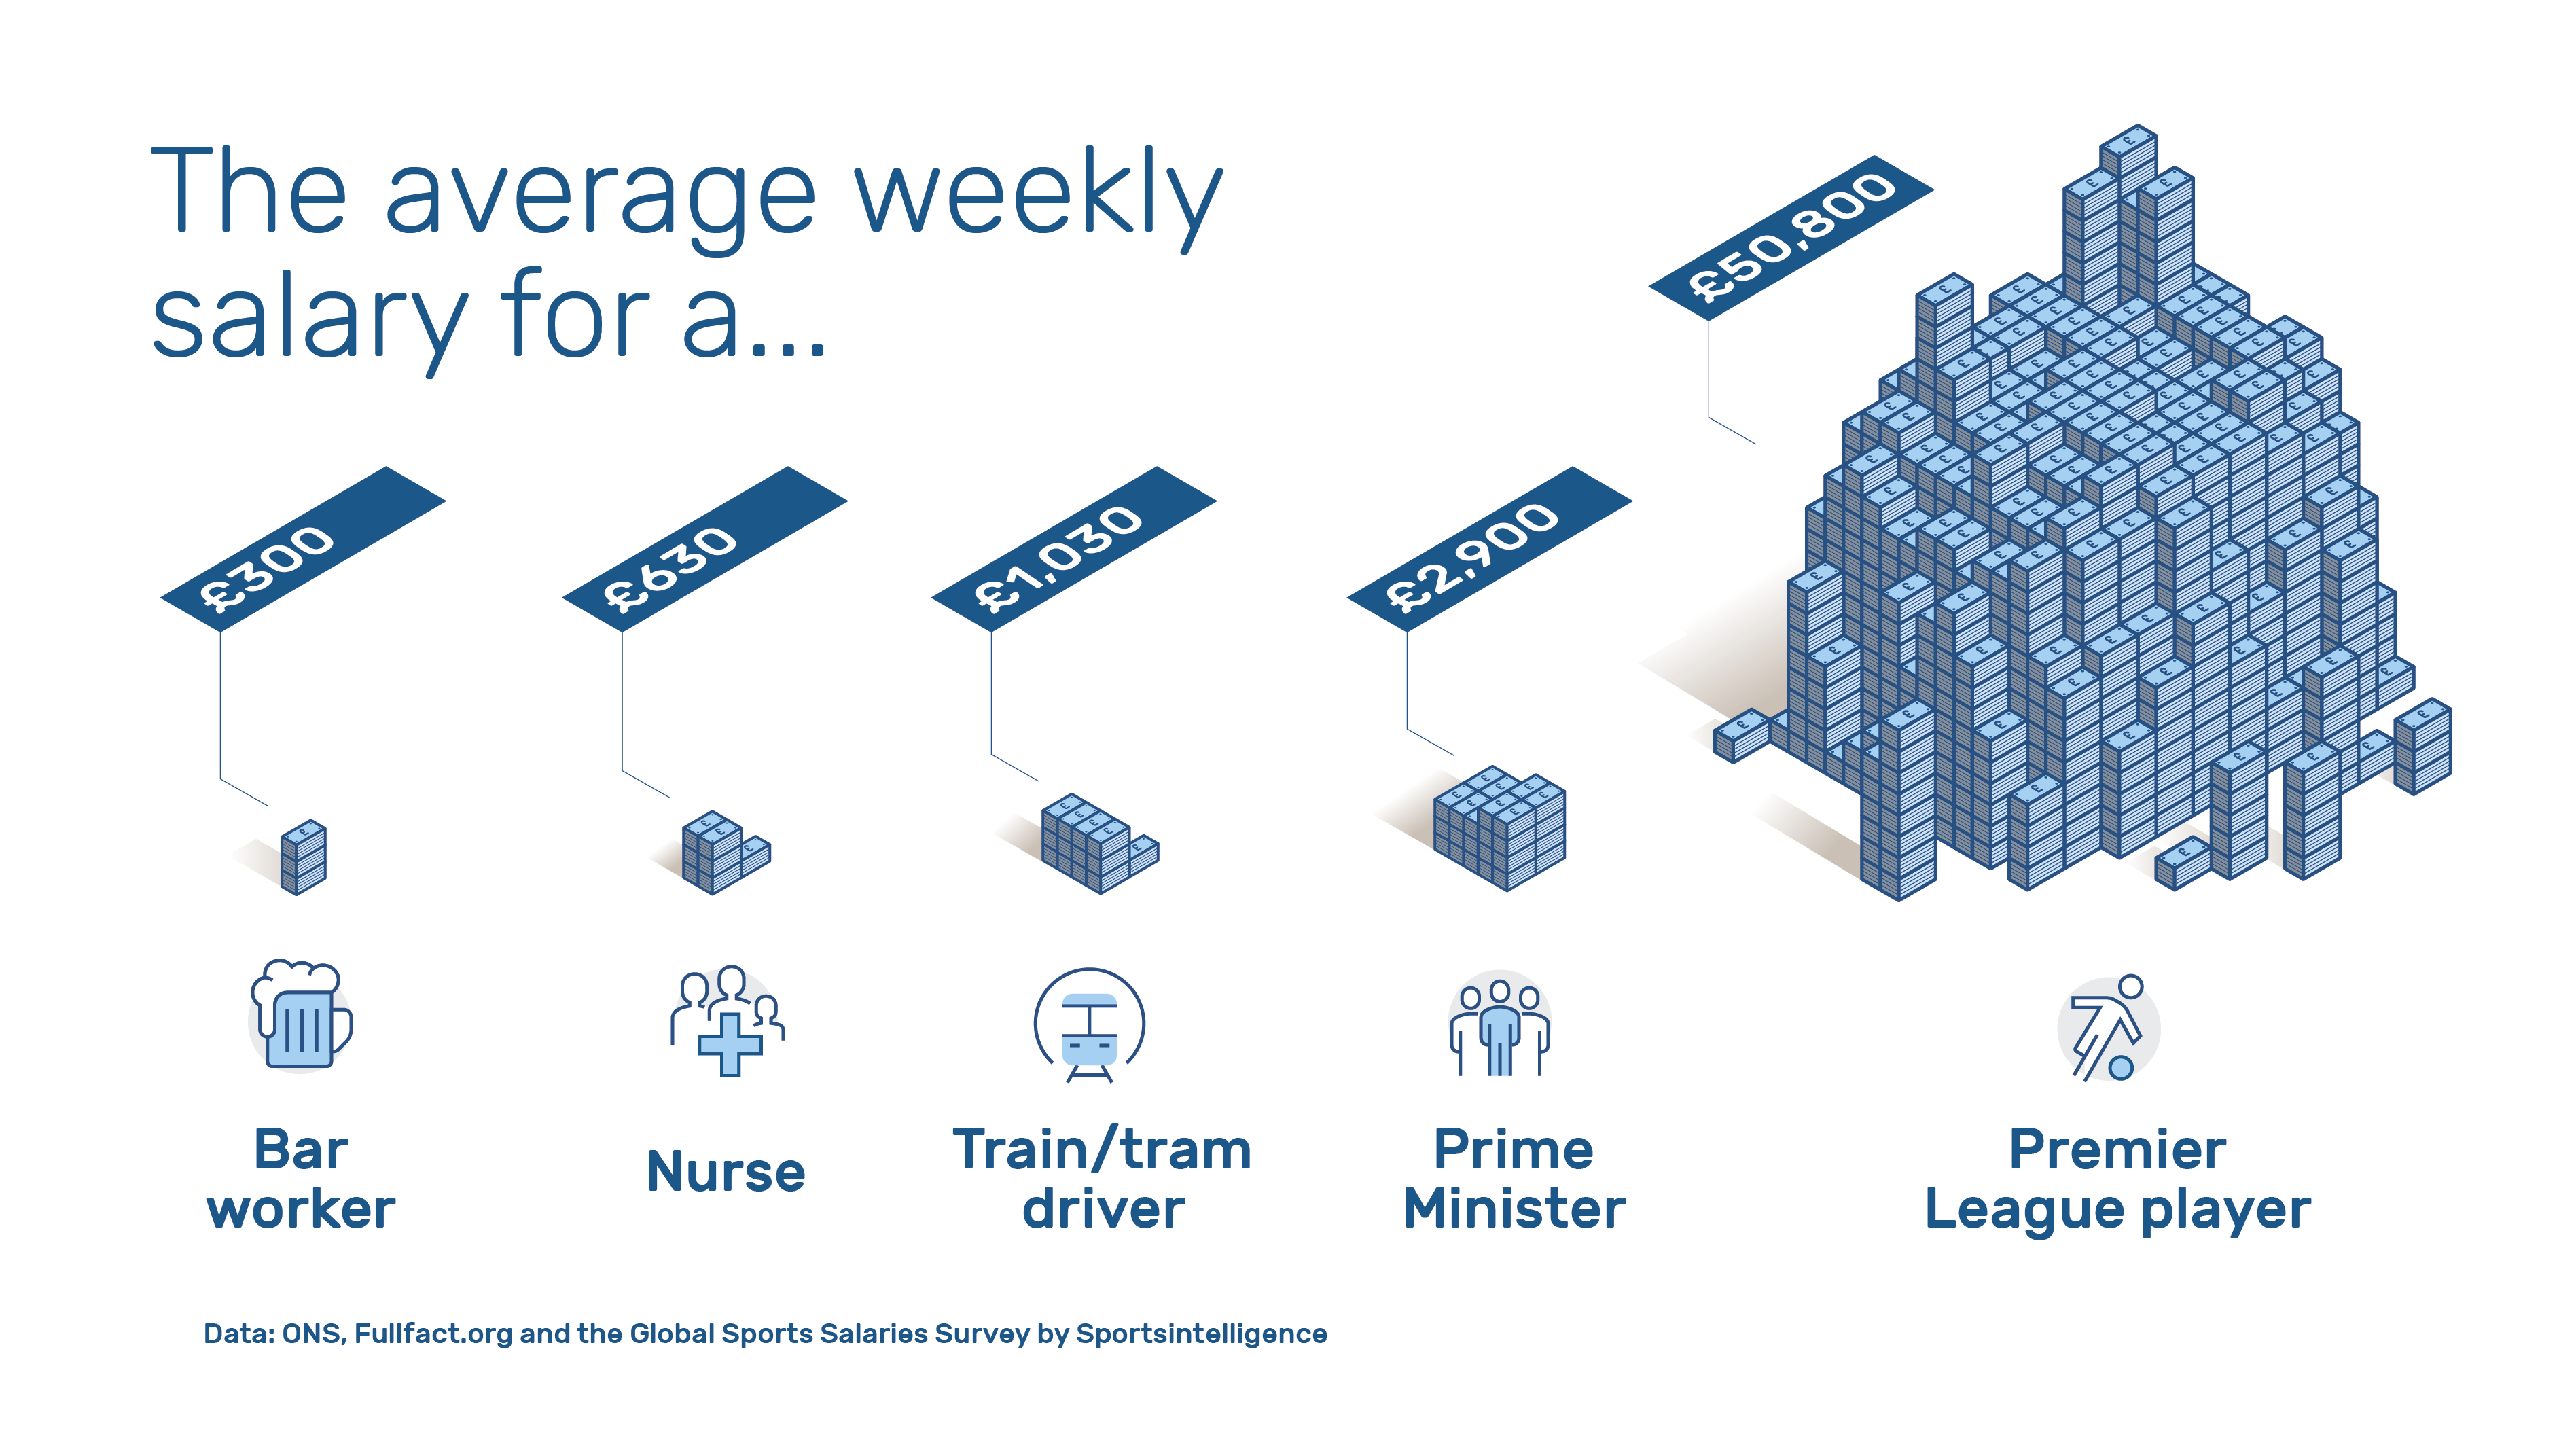 Comparison of the average weekly salary for a bar worker, nurse, train driver, prime minister and football players